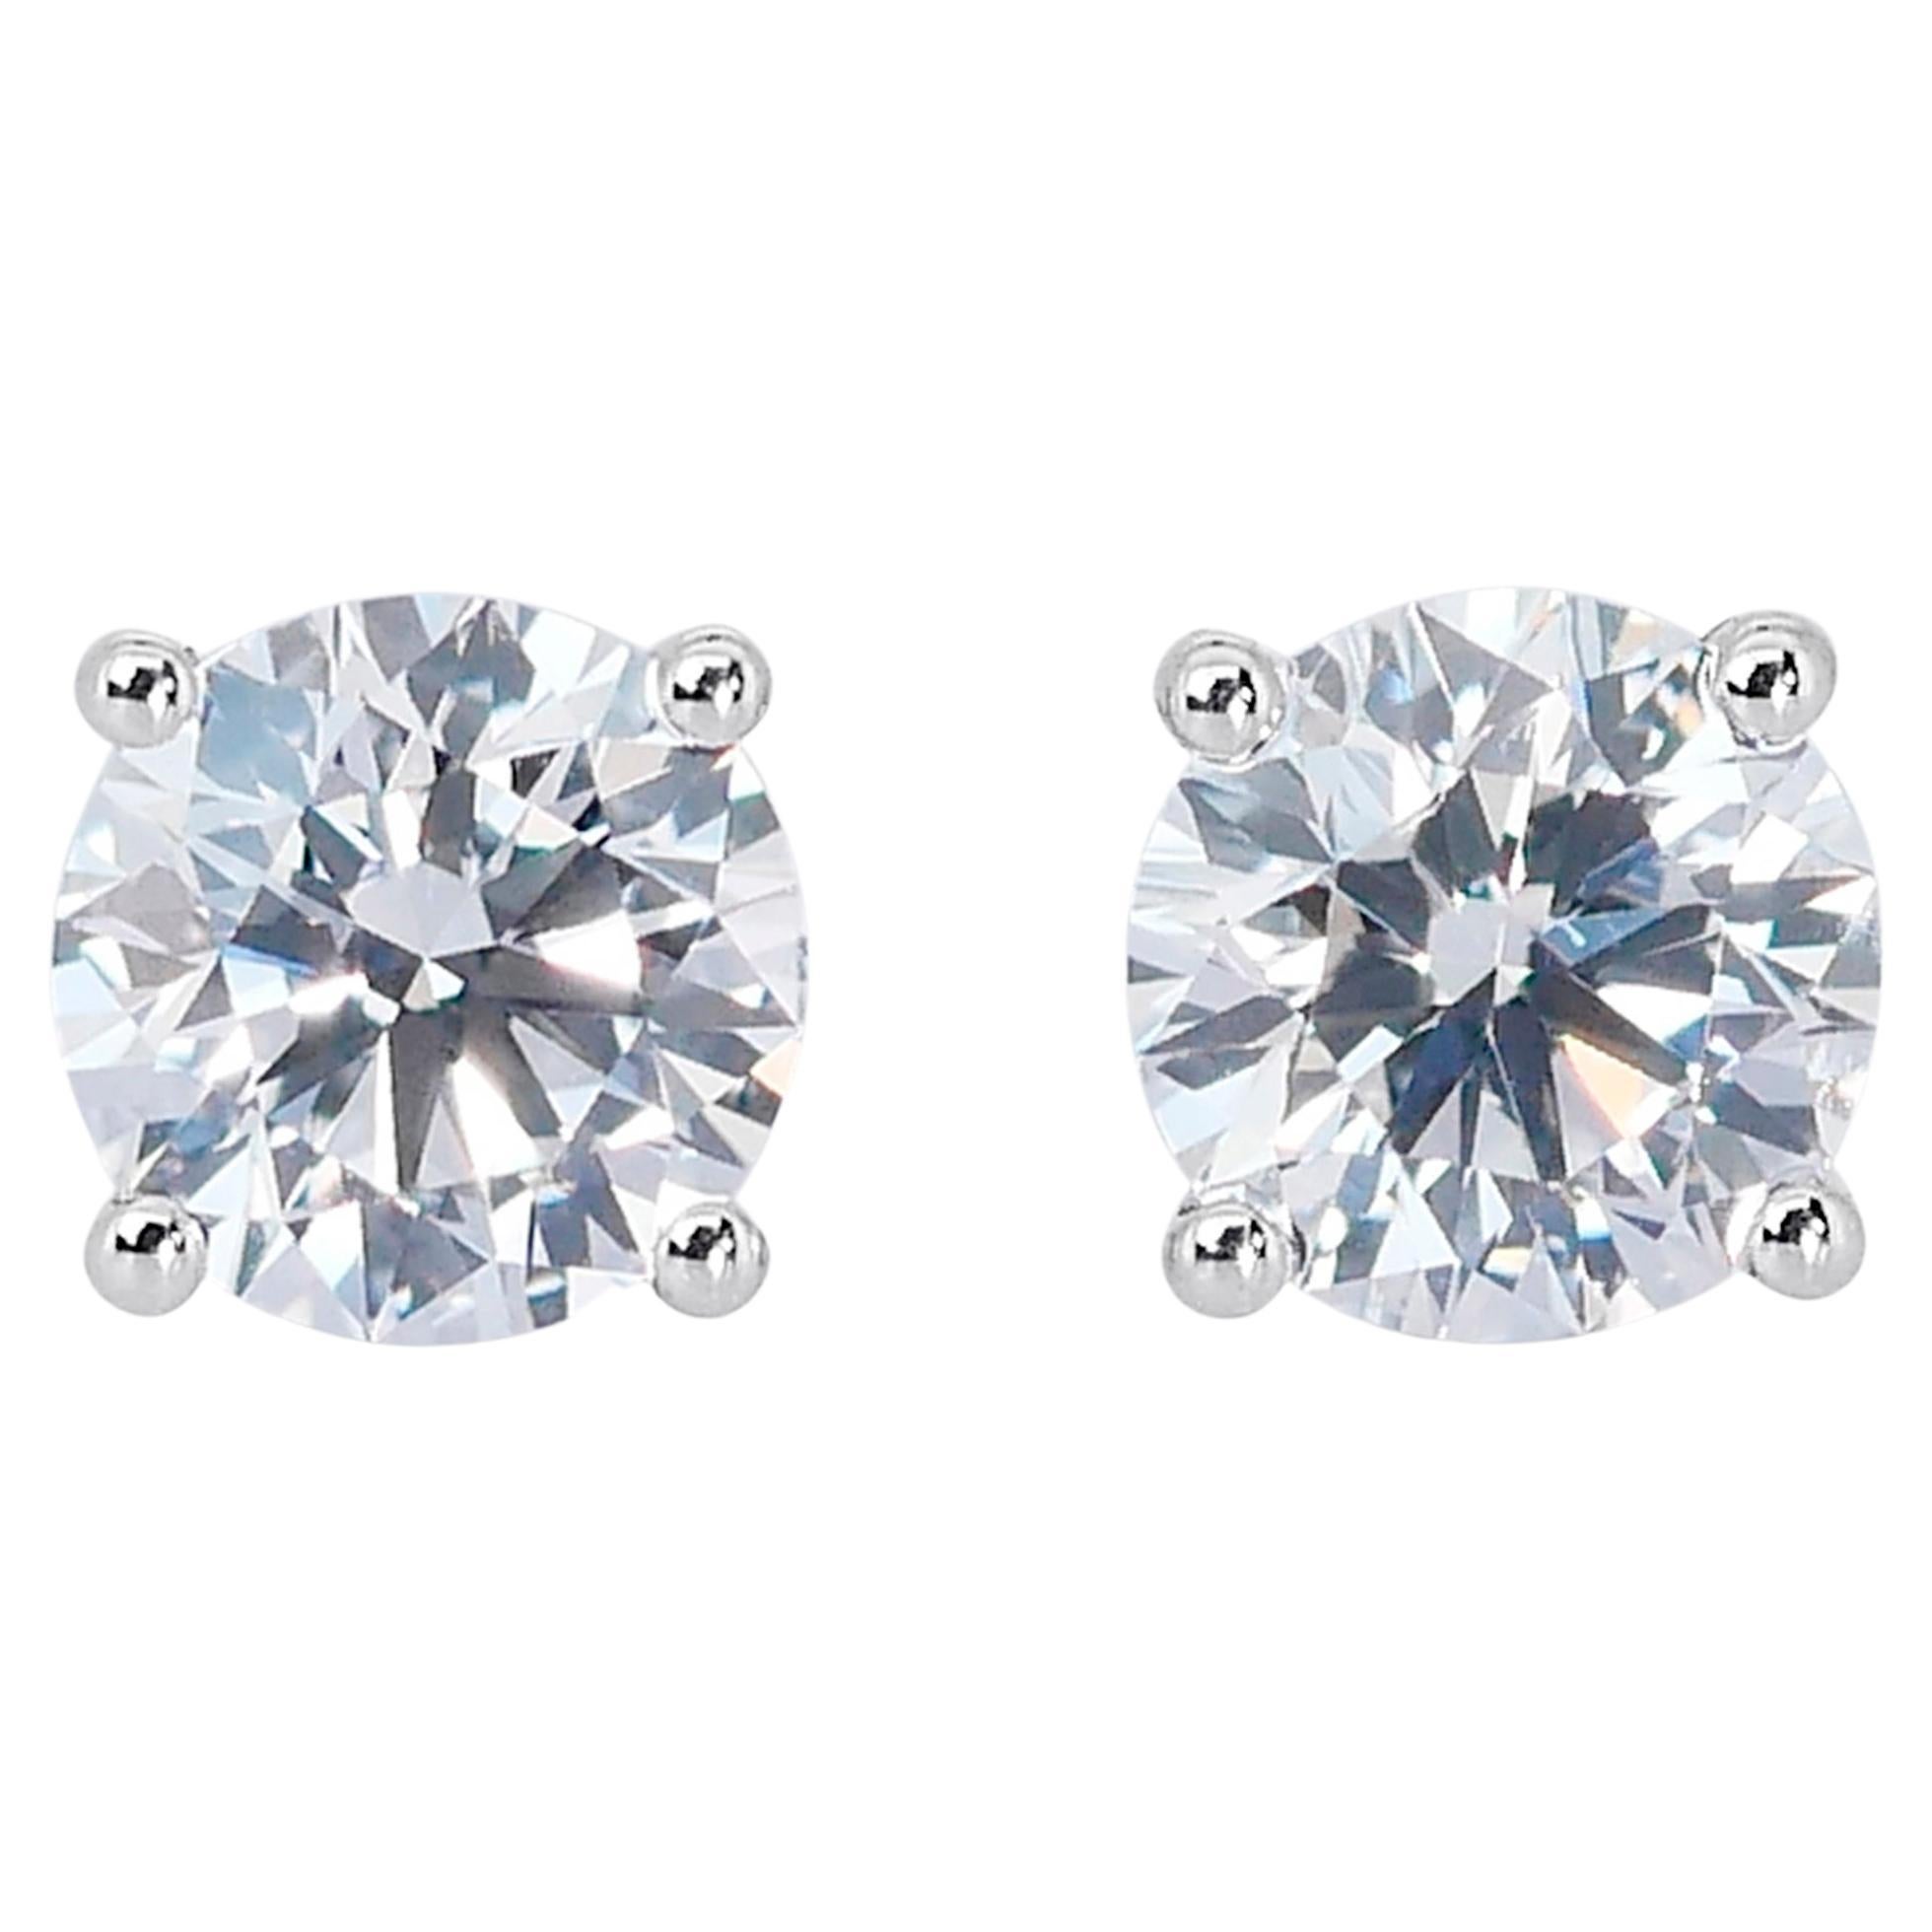 Spectacular 2.06ct Diamond Stud Earrings in 18k White Gold - GIA Certified For Sale